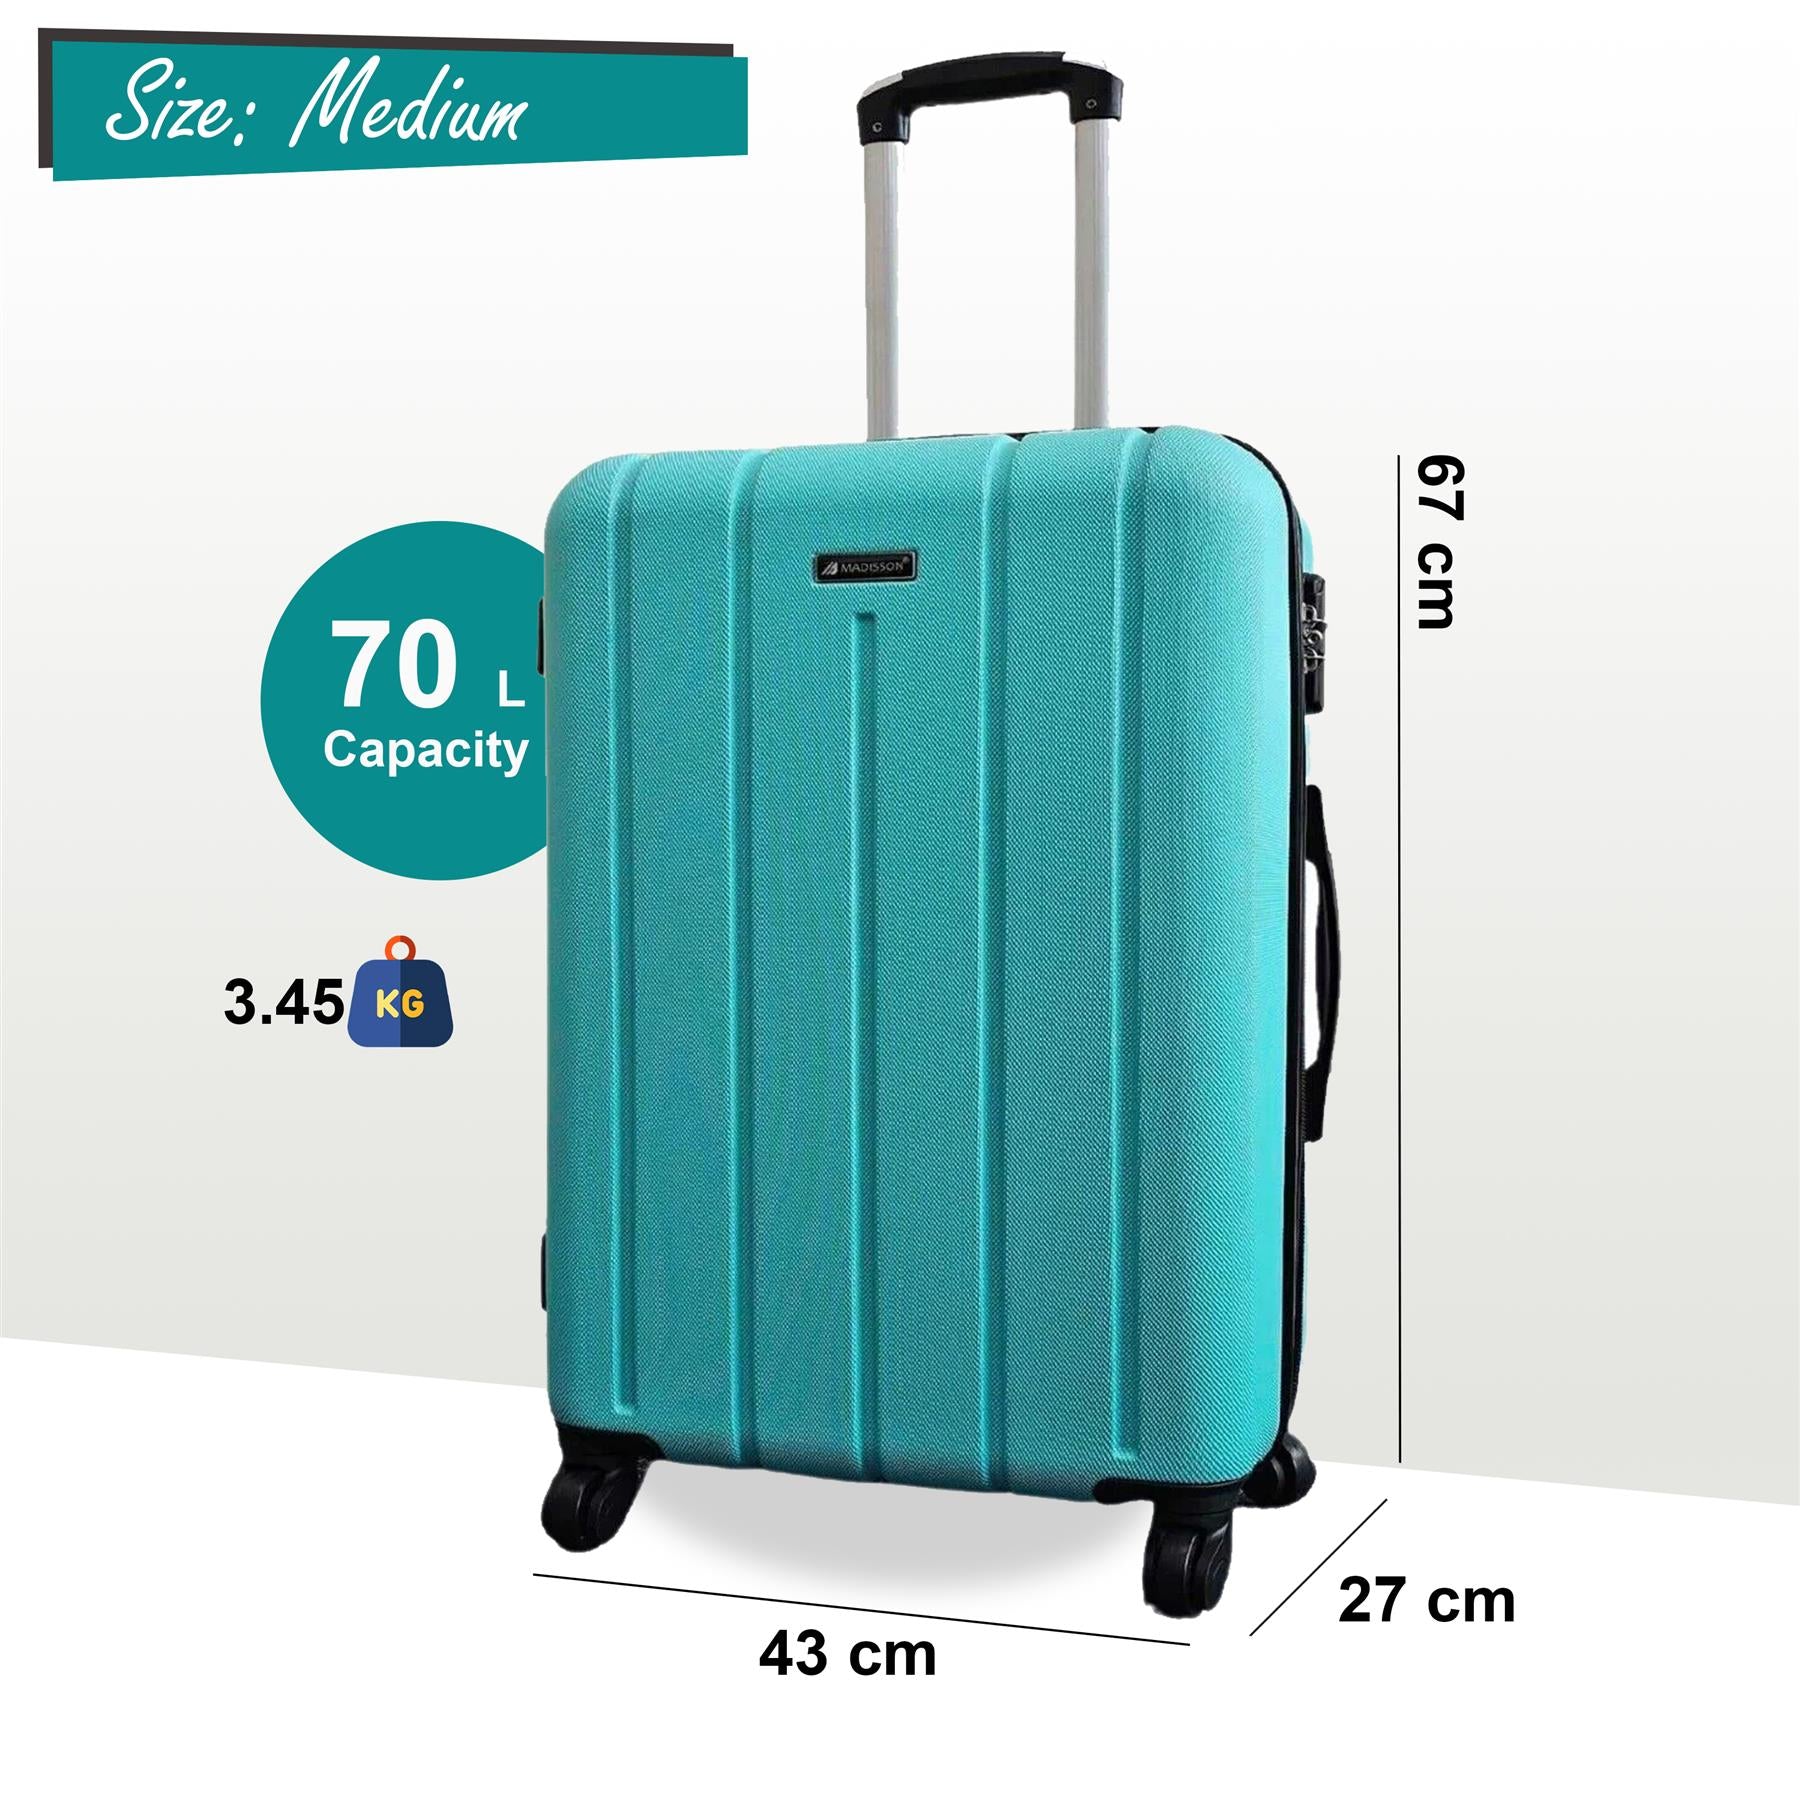 Castleberry Medium Hard Shell Suitcase in Teal